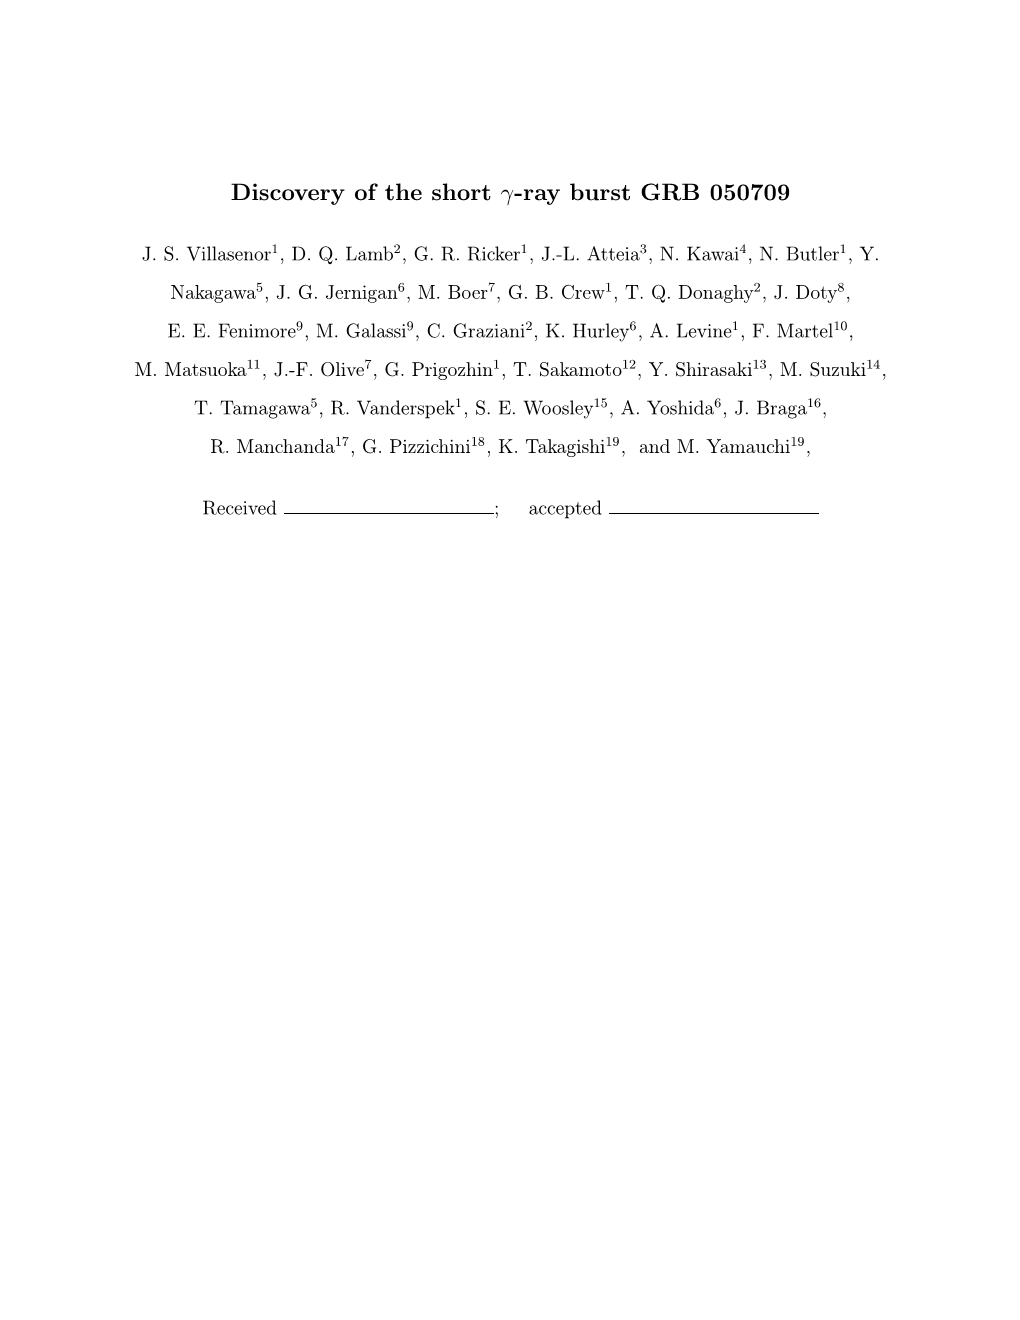 Discovery of the Short Γ-Ray Burst GRB 050709